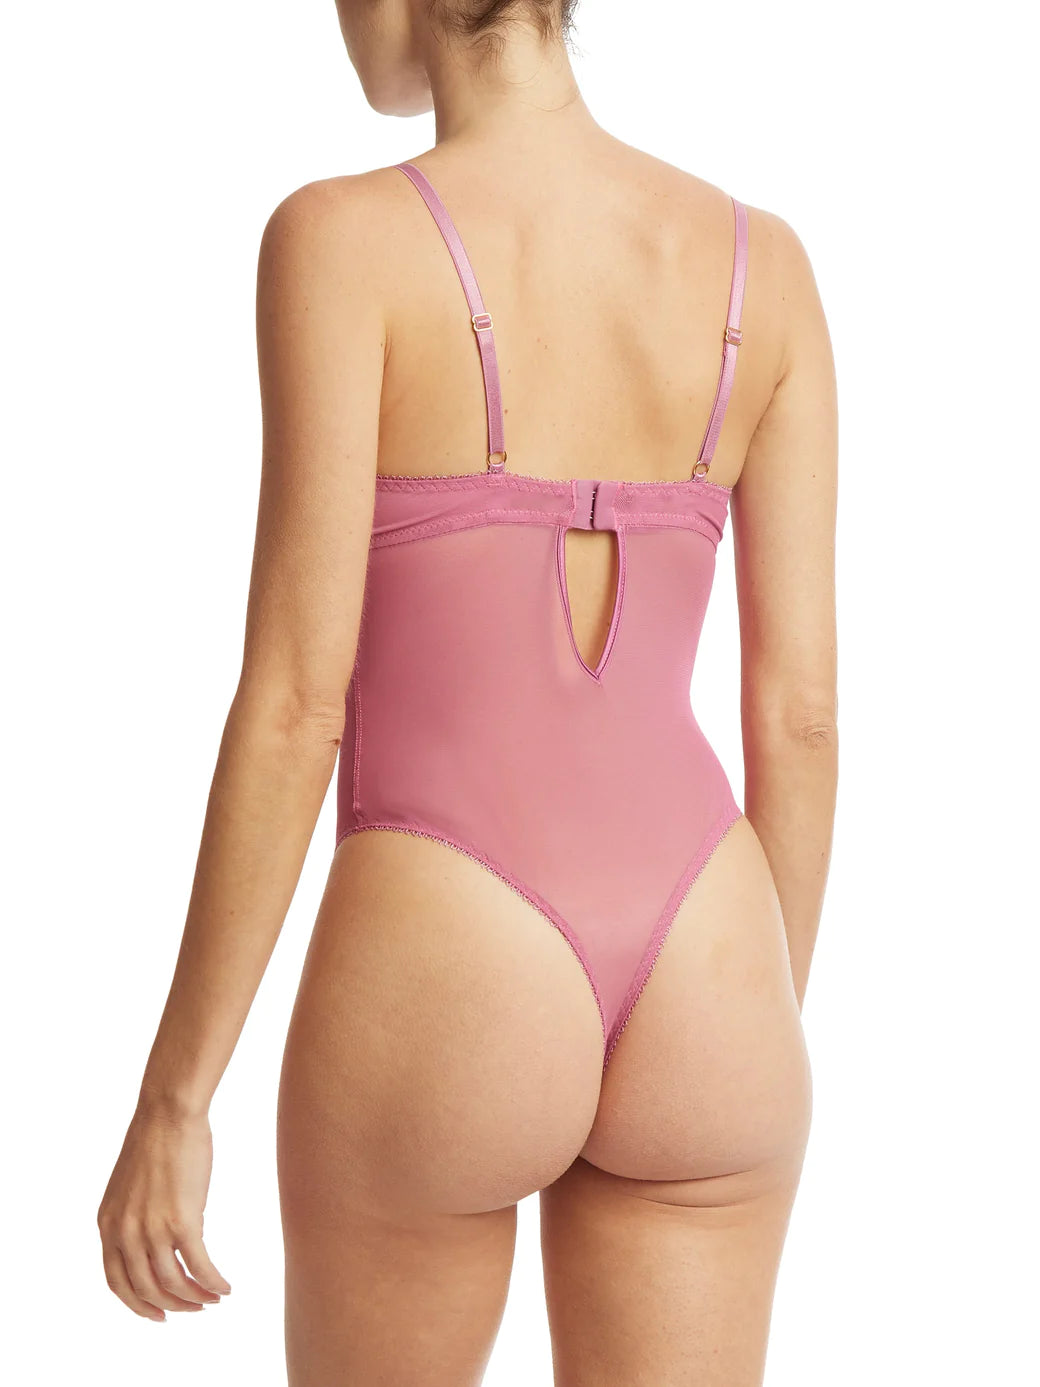 ALONG THE LINES UNDERWIRE BODYSUIT